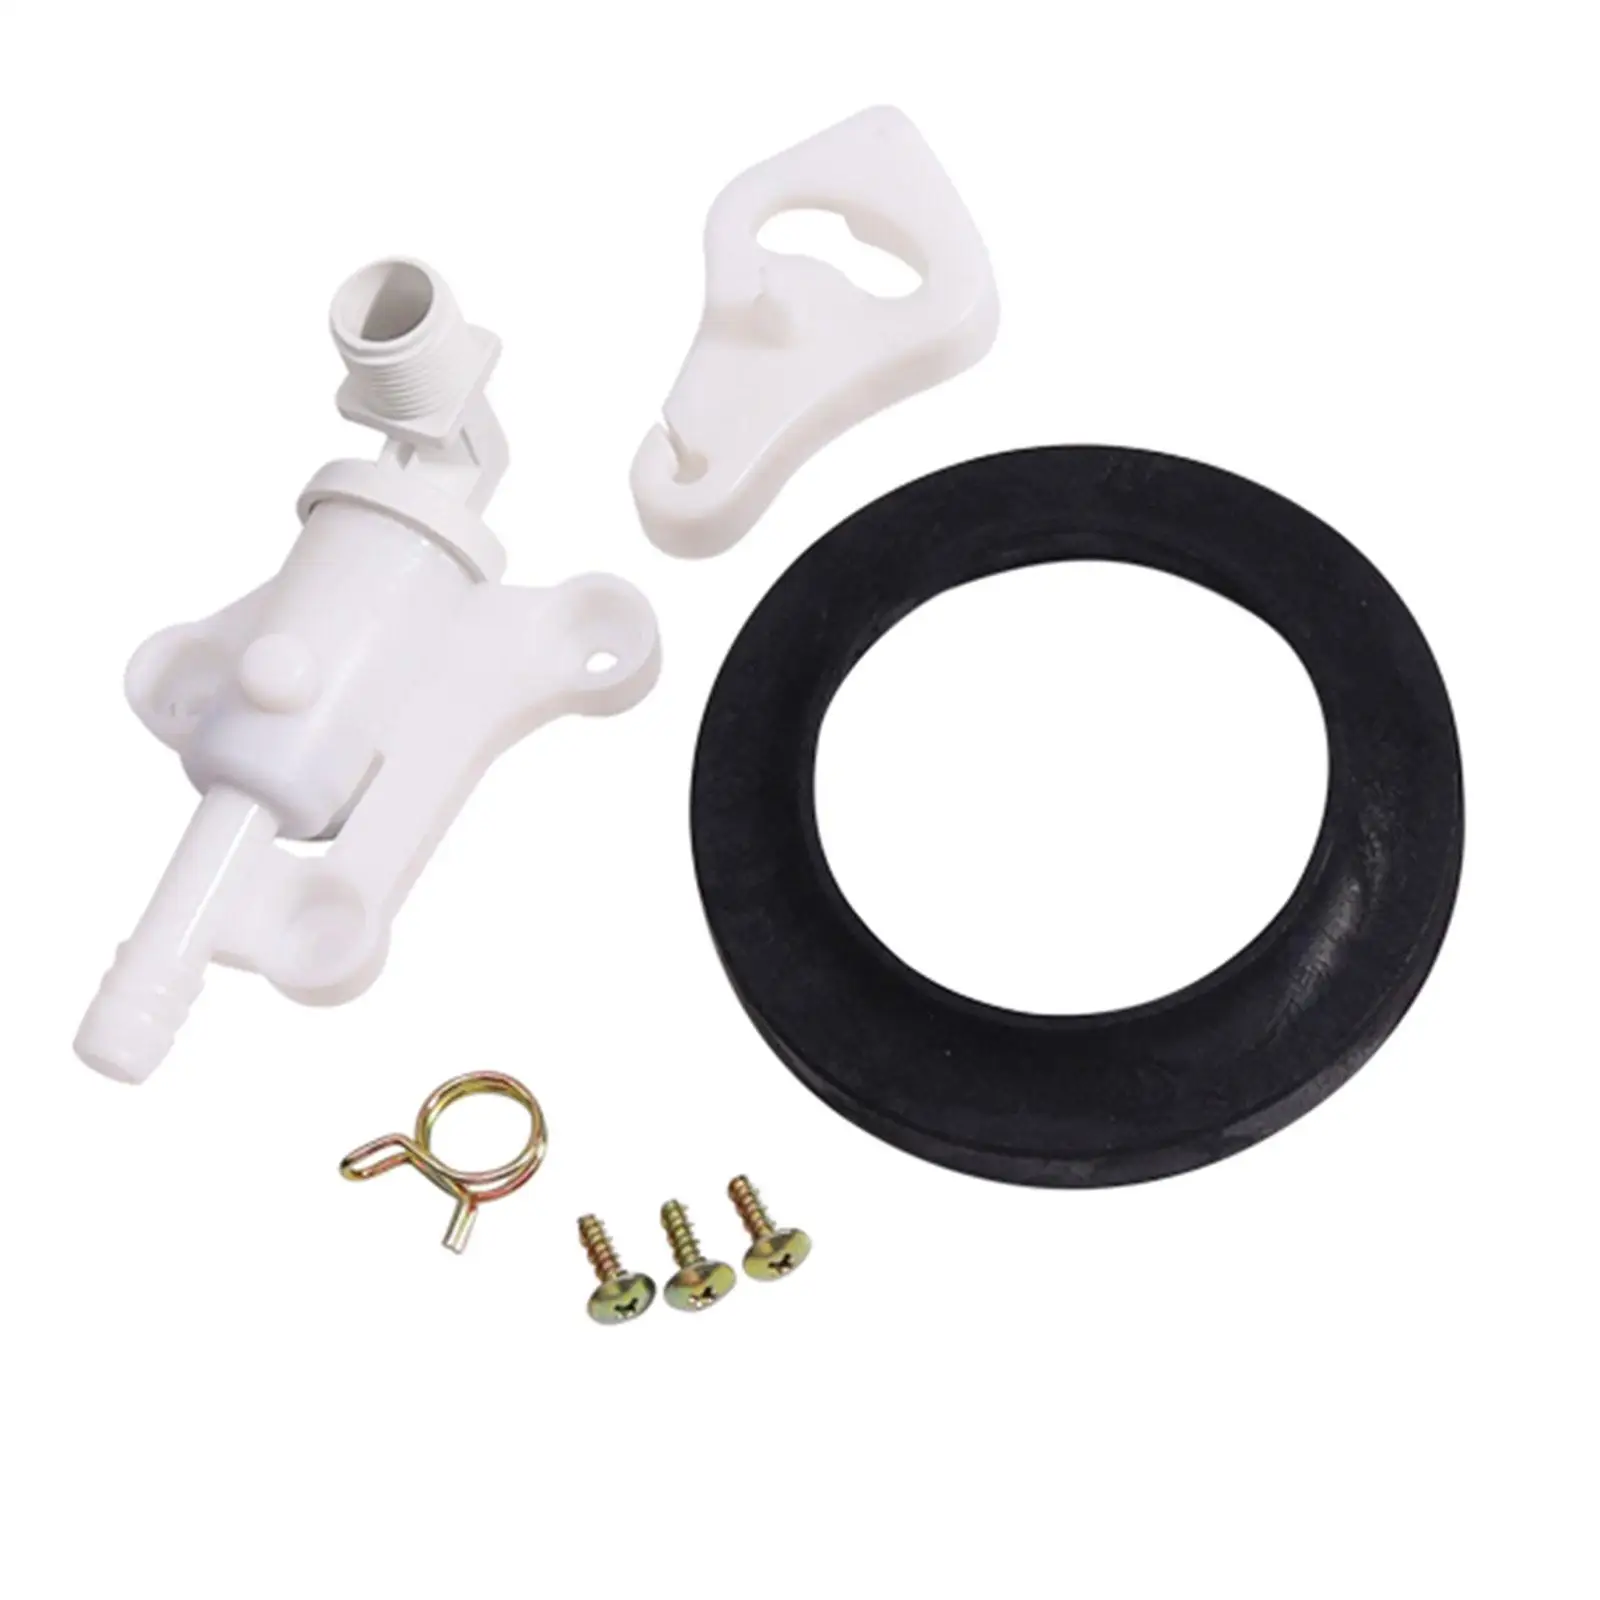 34100 RV Water Valve Convenient Replacements for Style Lite Toilets